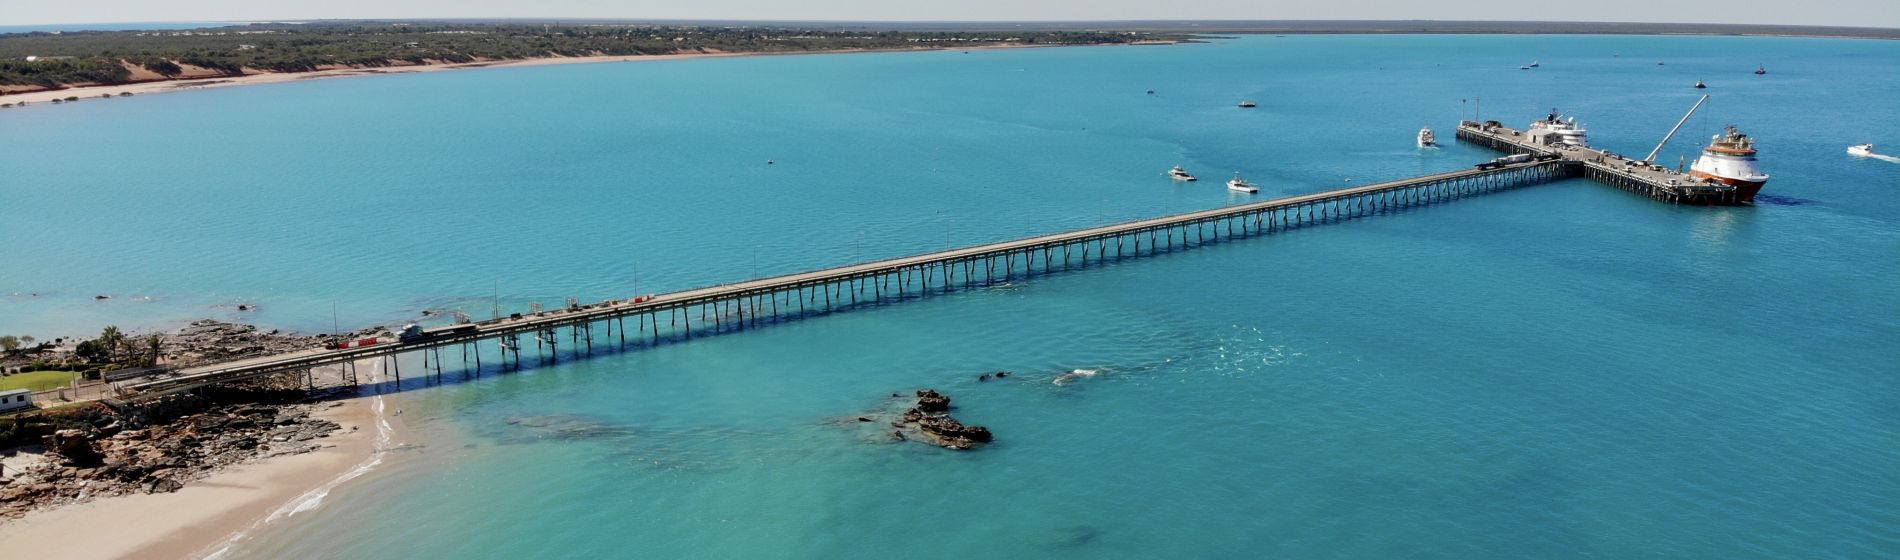 broome_jetty_photo_by_liam_s_drone.jpeg